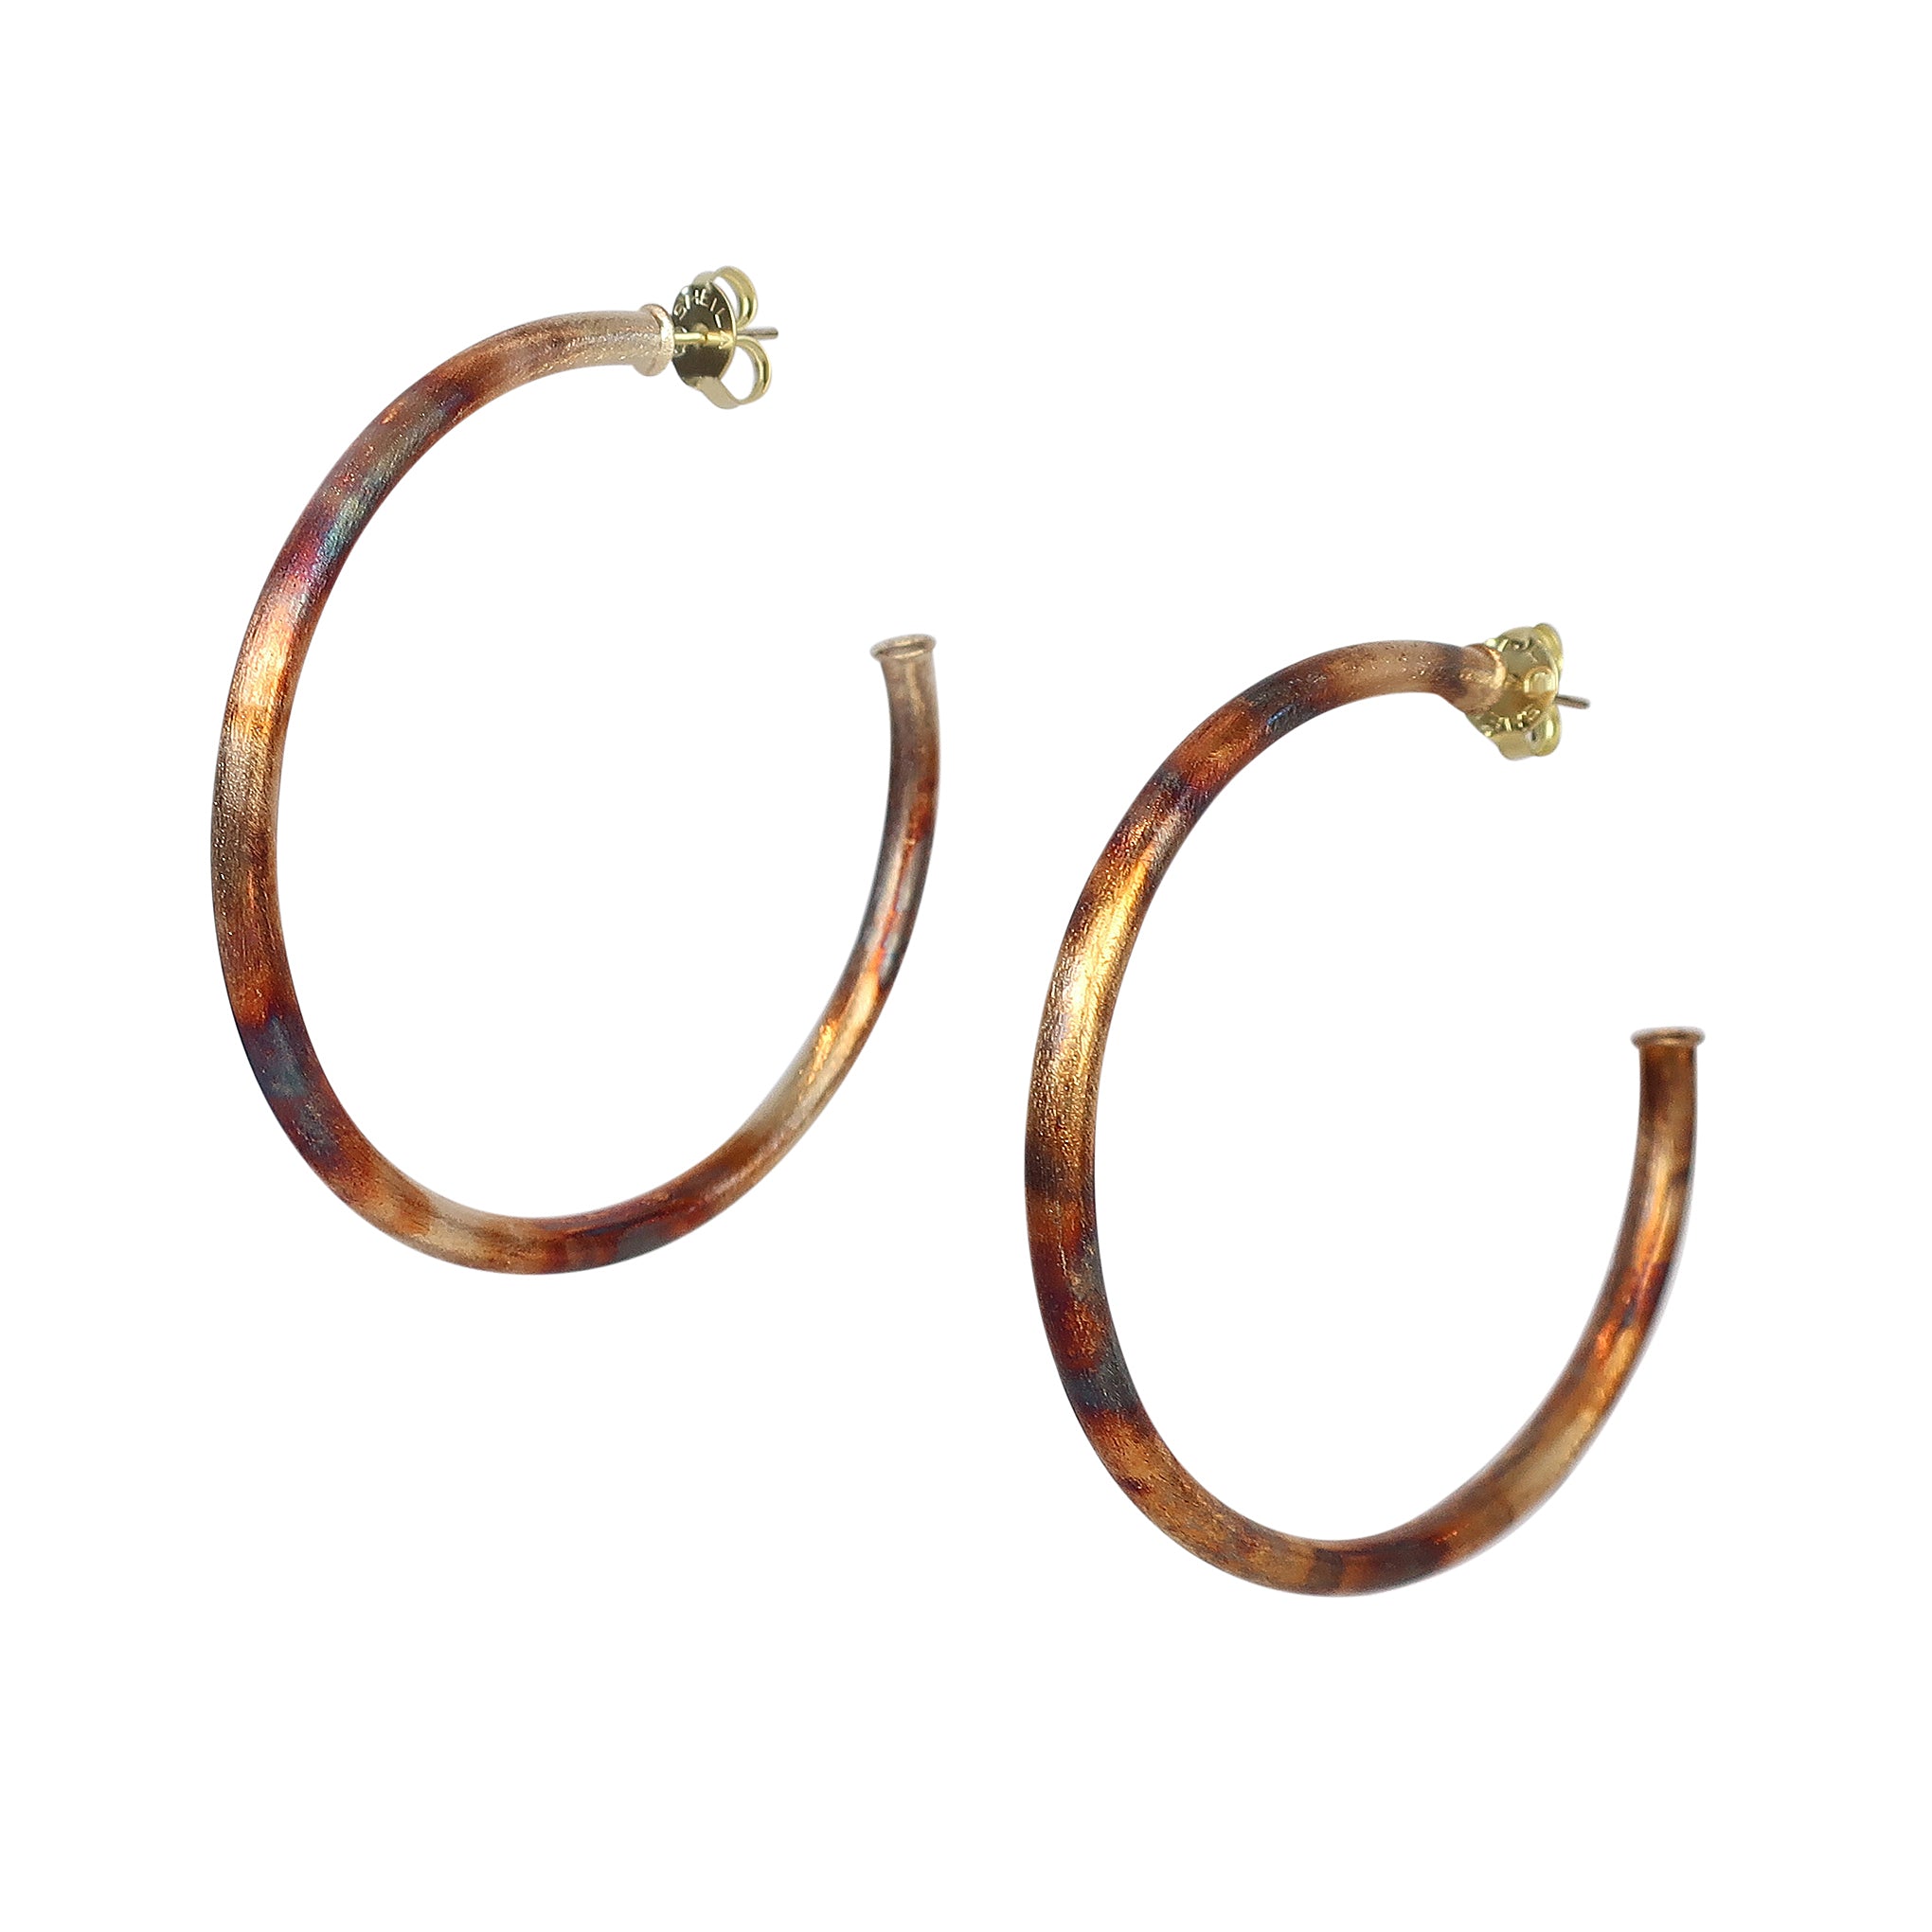 Sheila Fajl 2.25 Inch Everybody's Favorite Hoop Earrings in Brushed Burnished Gold Plated